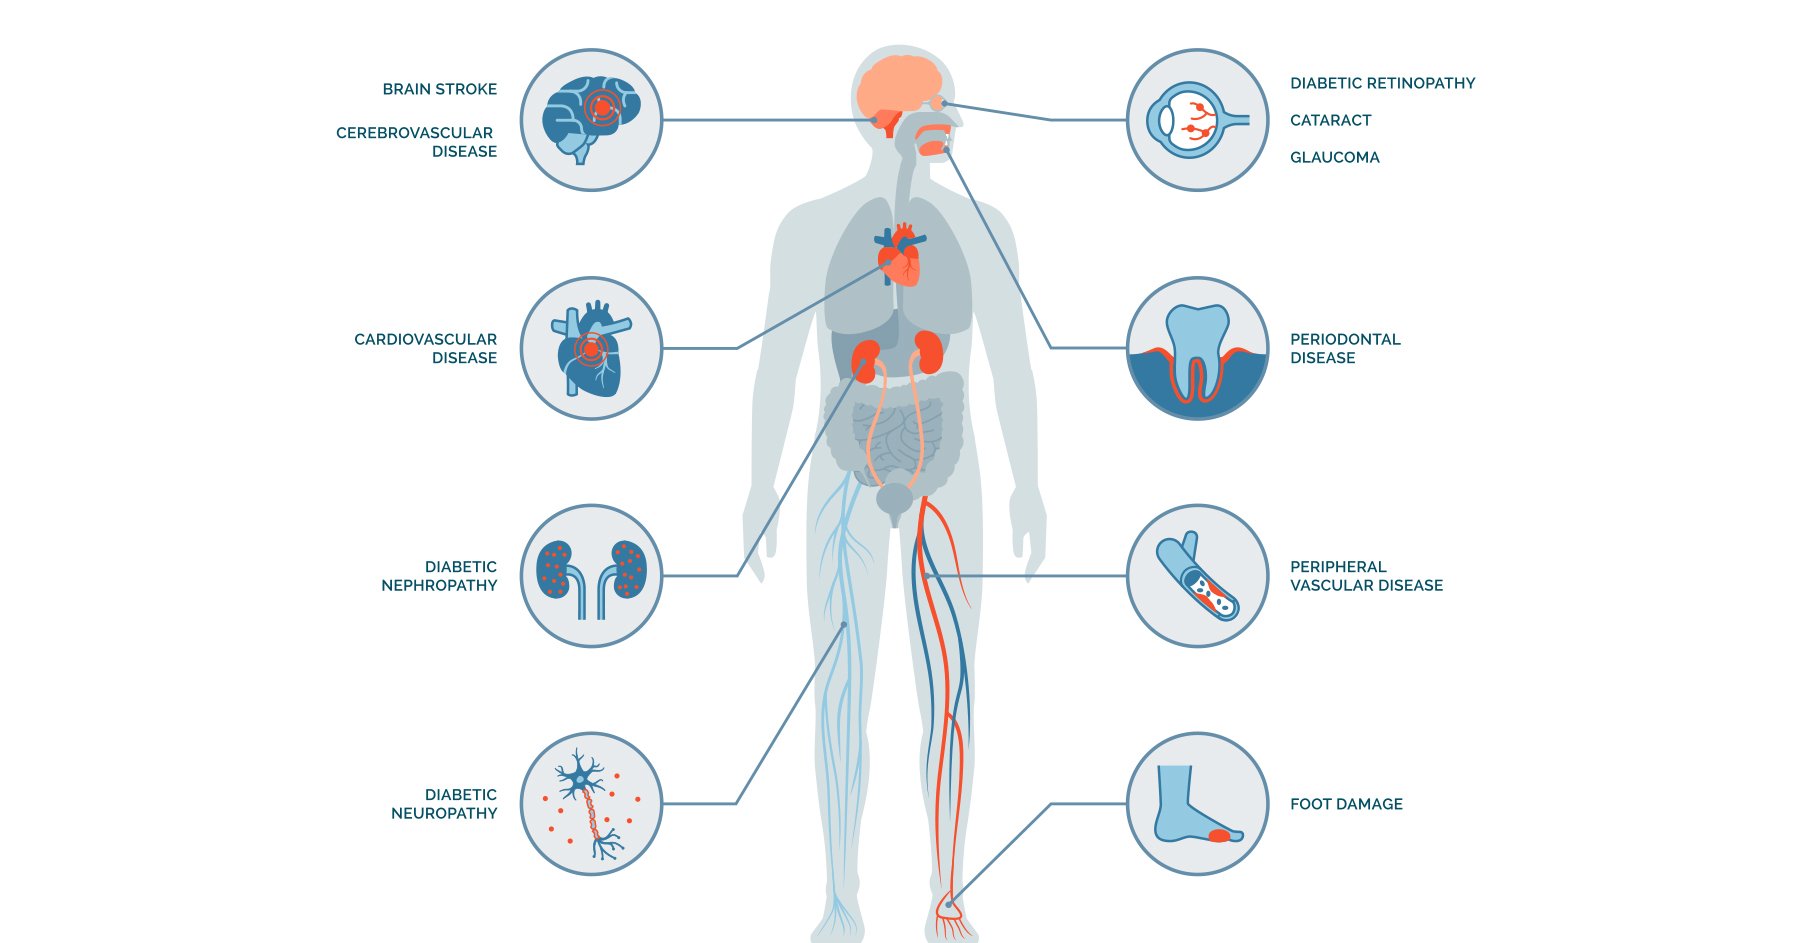 Image displaying endocrine functions in the body.